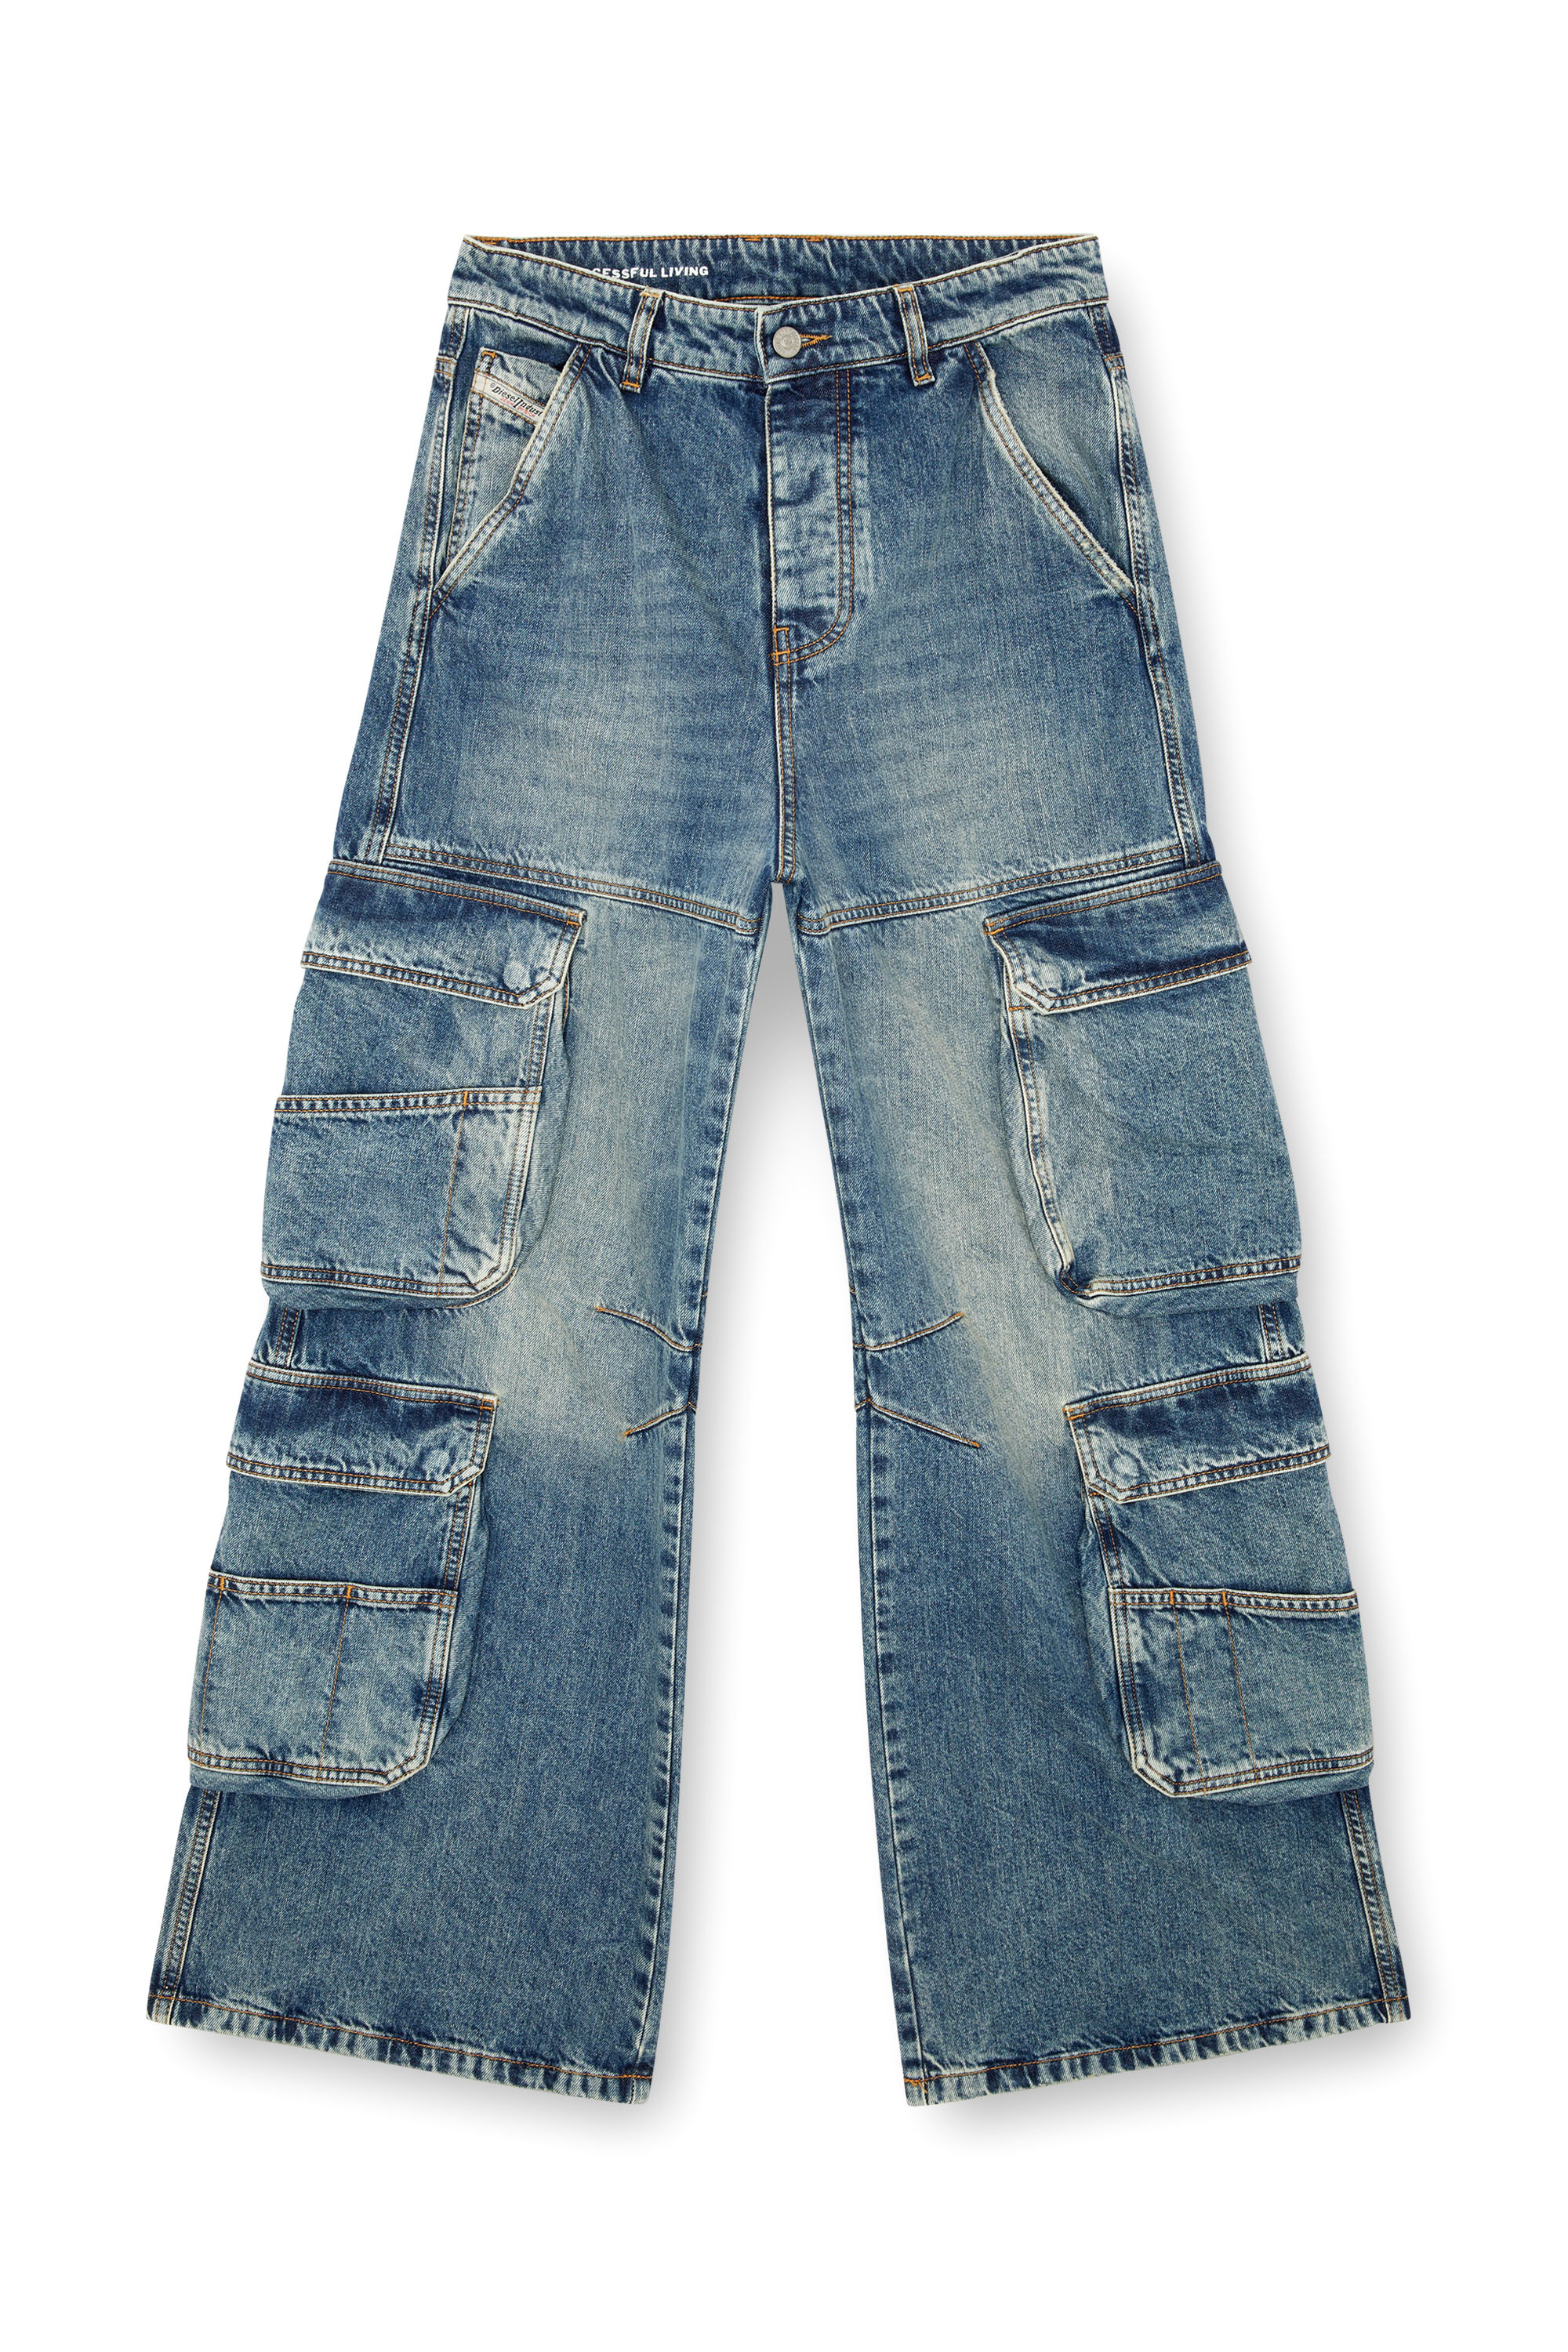 Diesel - Straight Jeans 1996 D-Sire 0NLAX, Mujer Straight Jeans - 1996 D-Sire in Azul marino - Image 3